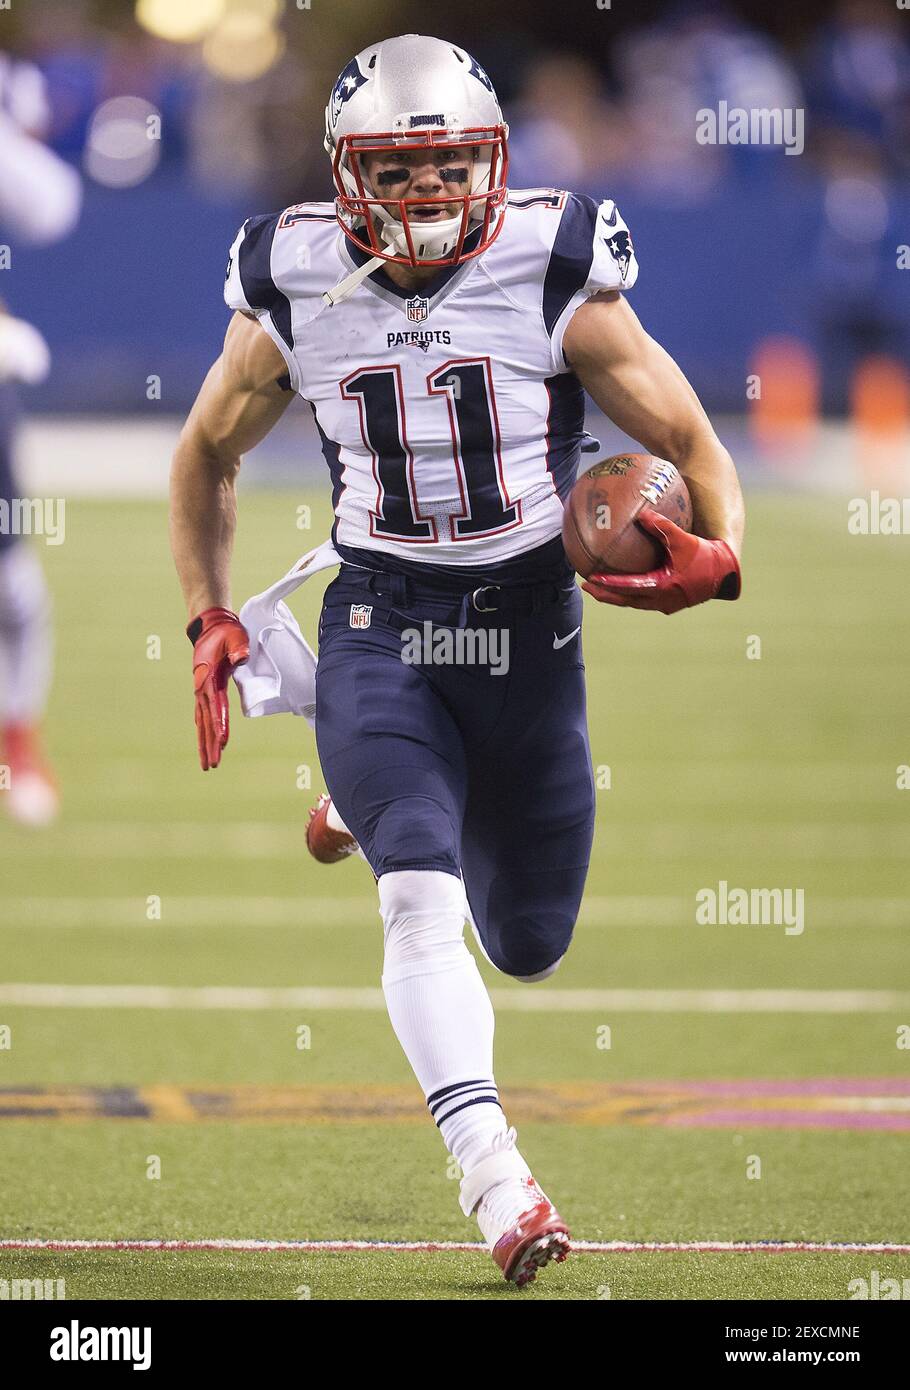 October 18, 2015: New England Patriots wide receiver Julian Edelman (11)  runs with the ball during NFL football game action between the New England  Patriots and the Indianapolis Colts at Lucas Oil